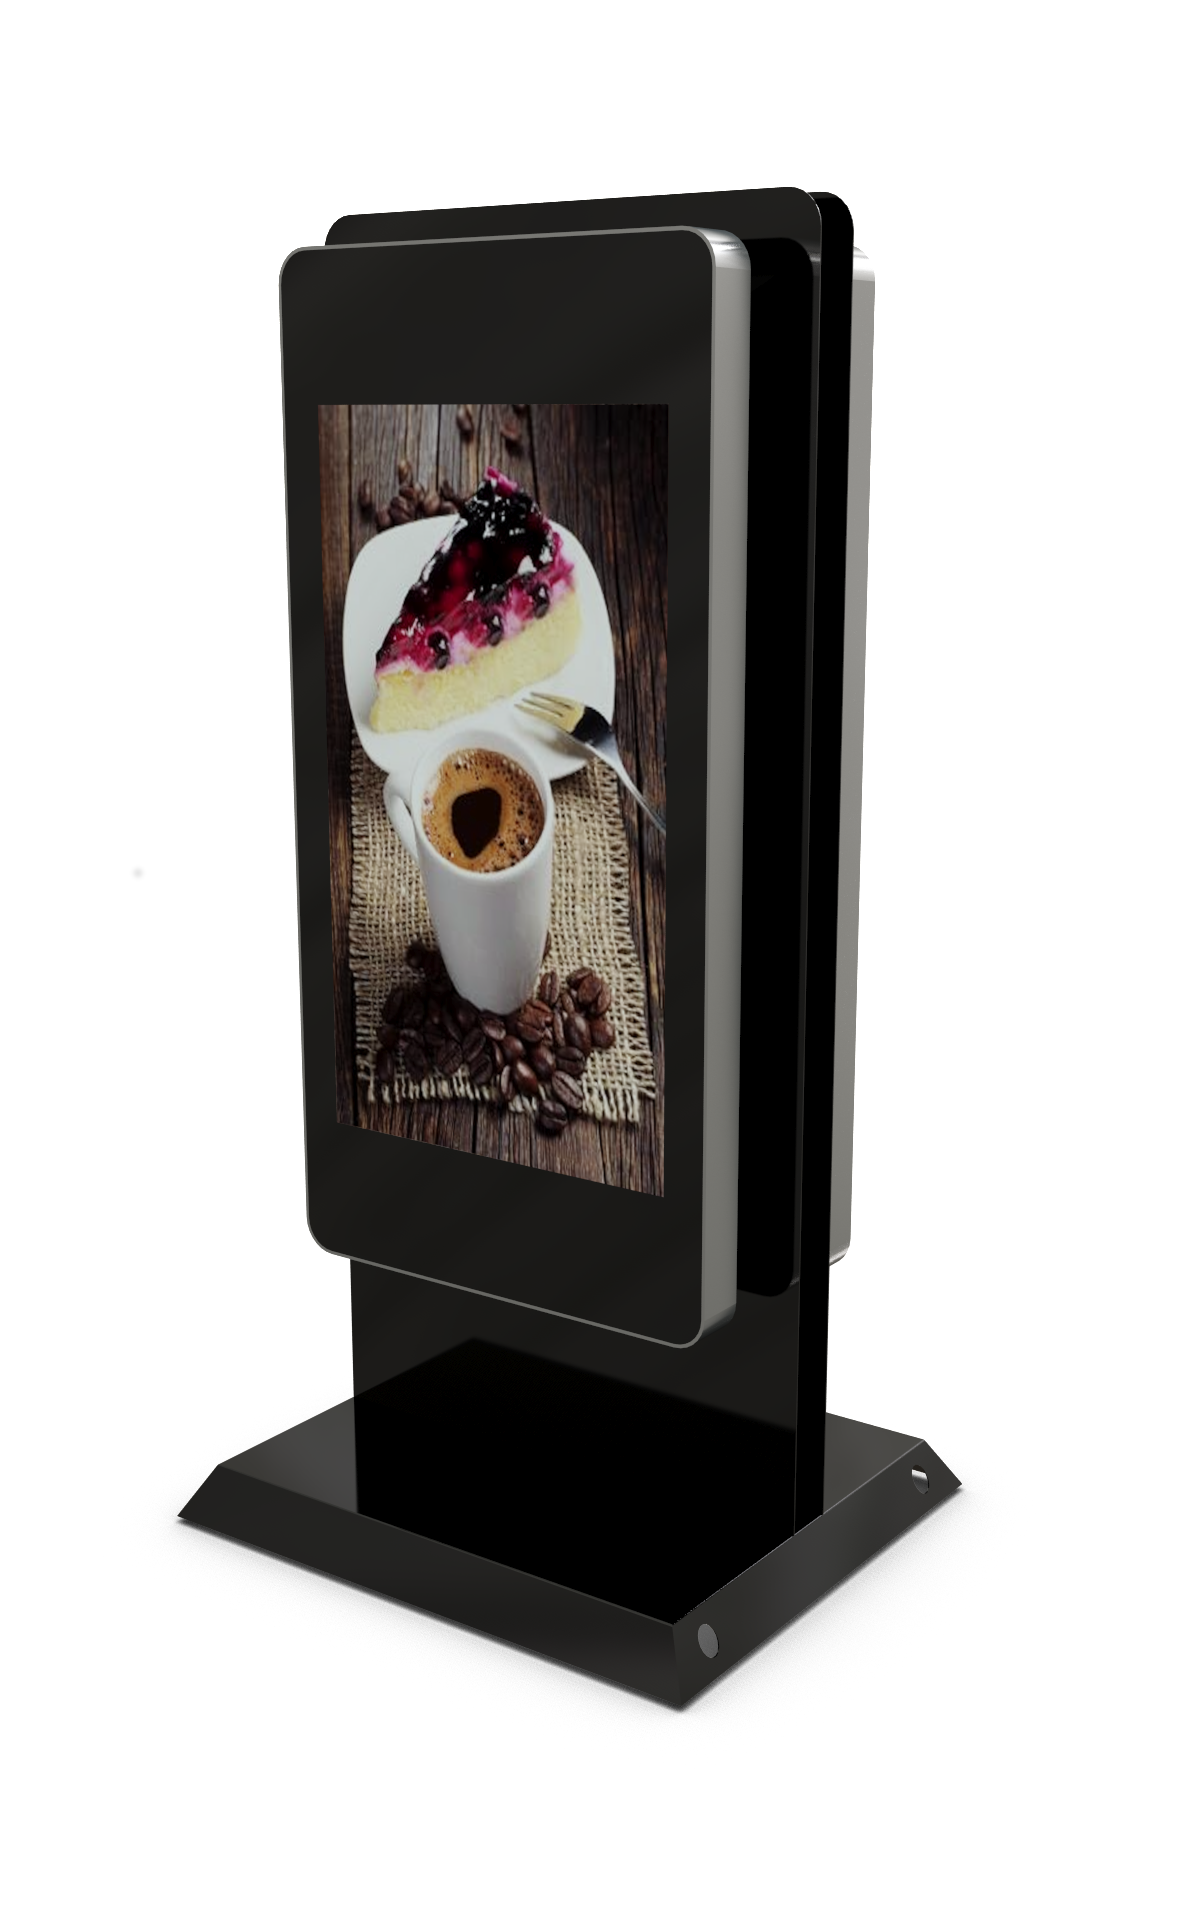 Double Sided Mobile outdoor 47" Digital Advertising Display front three quarter view